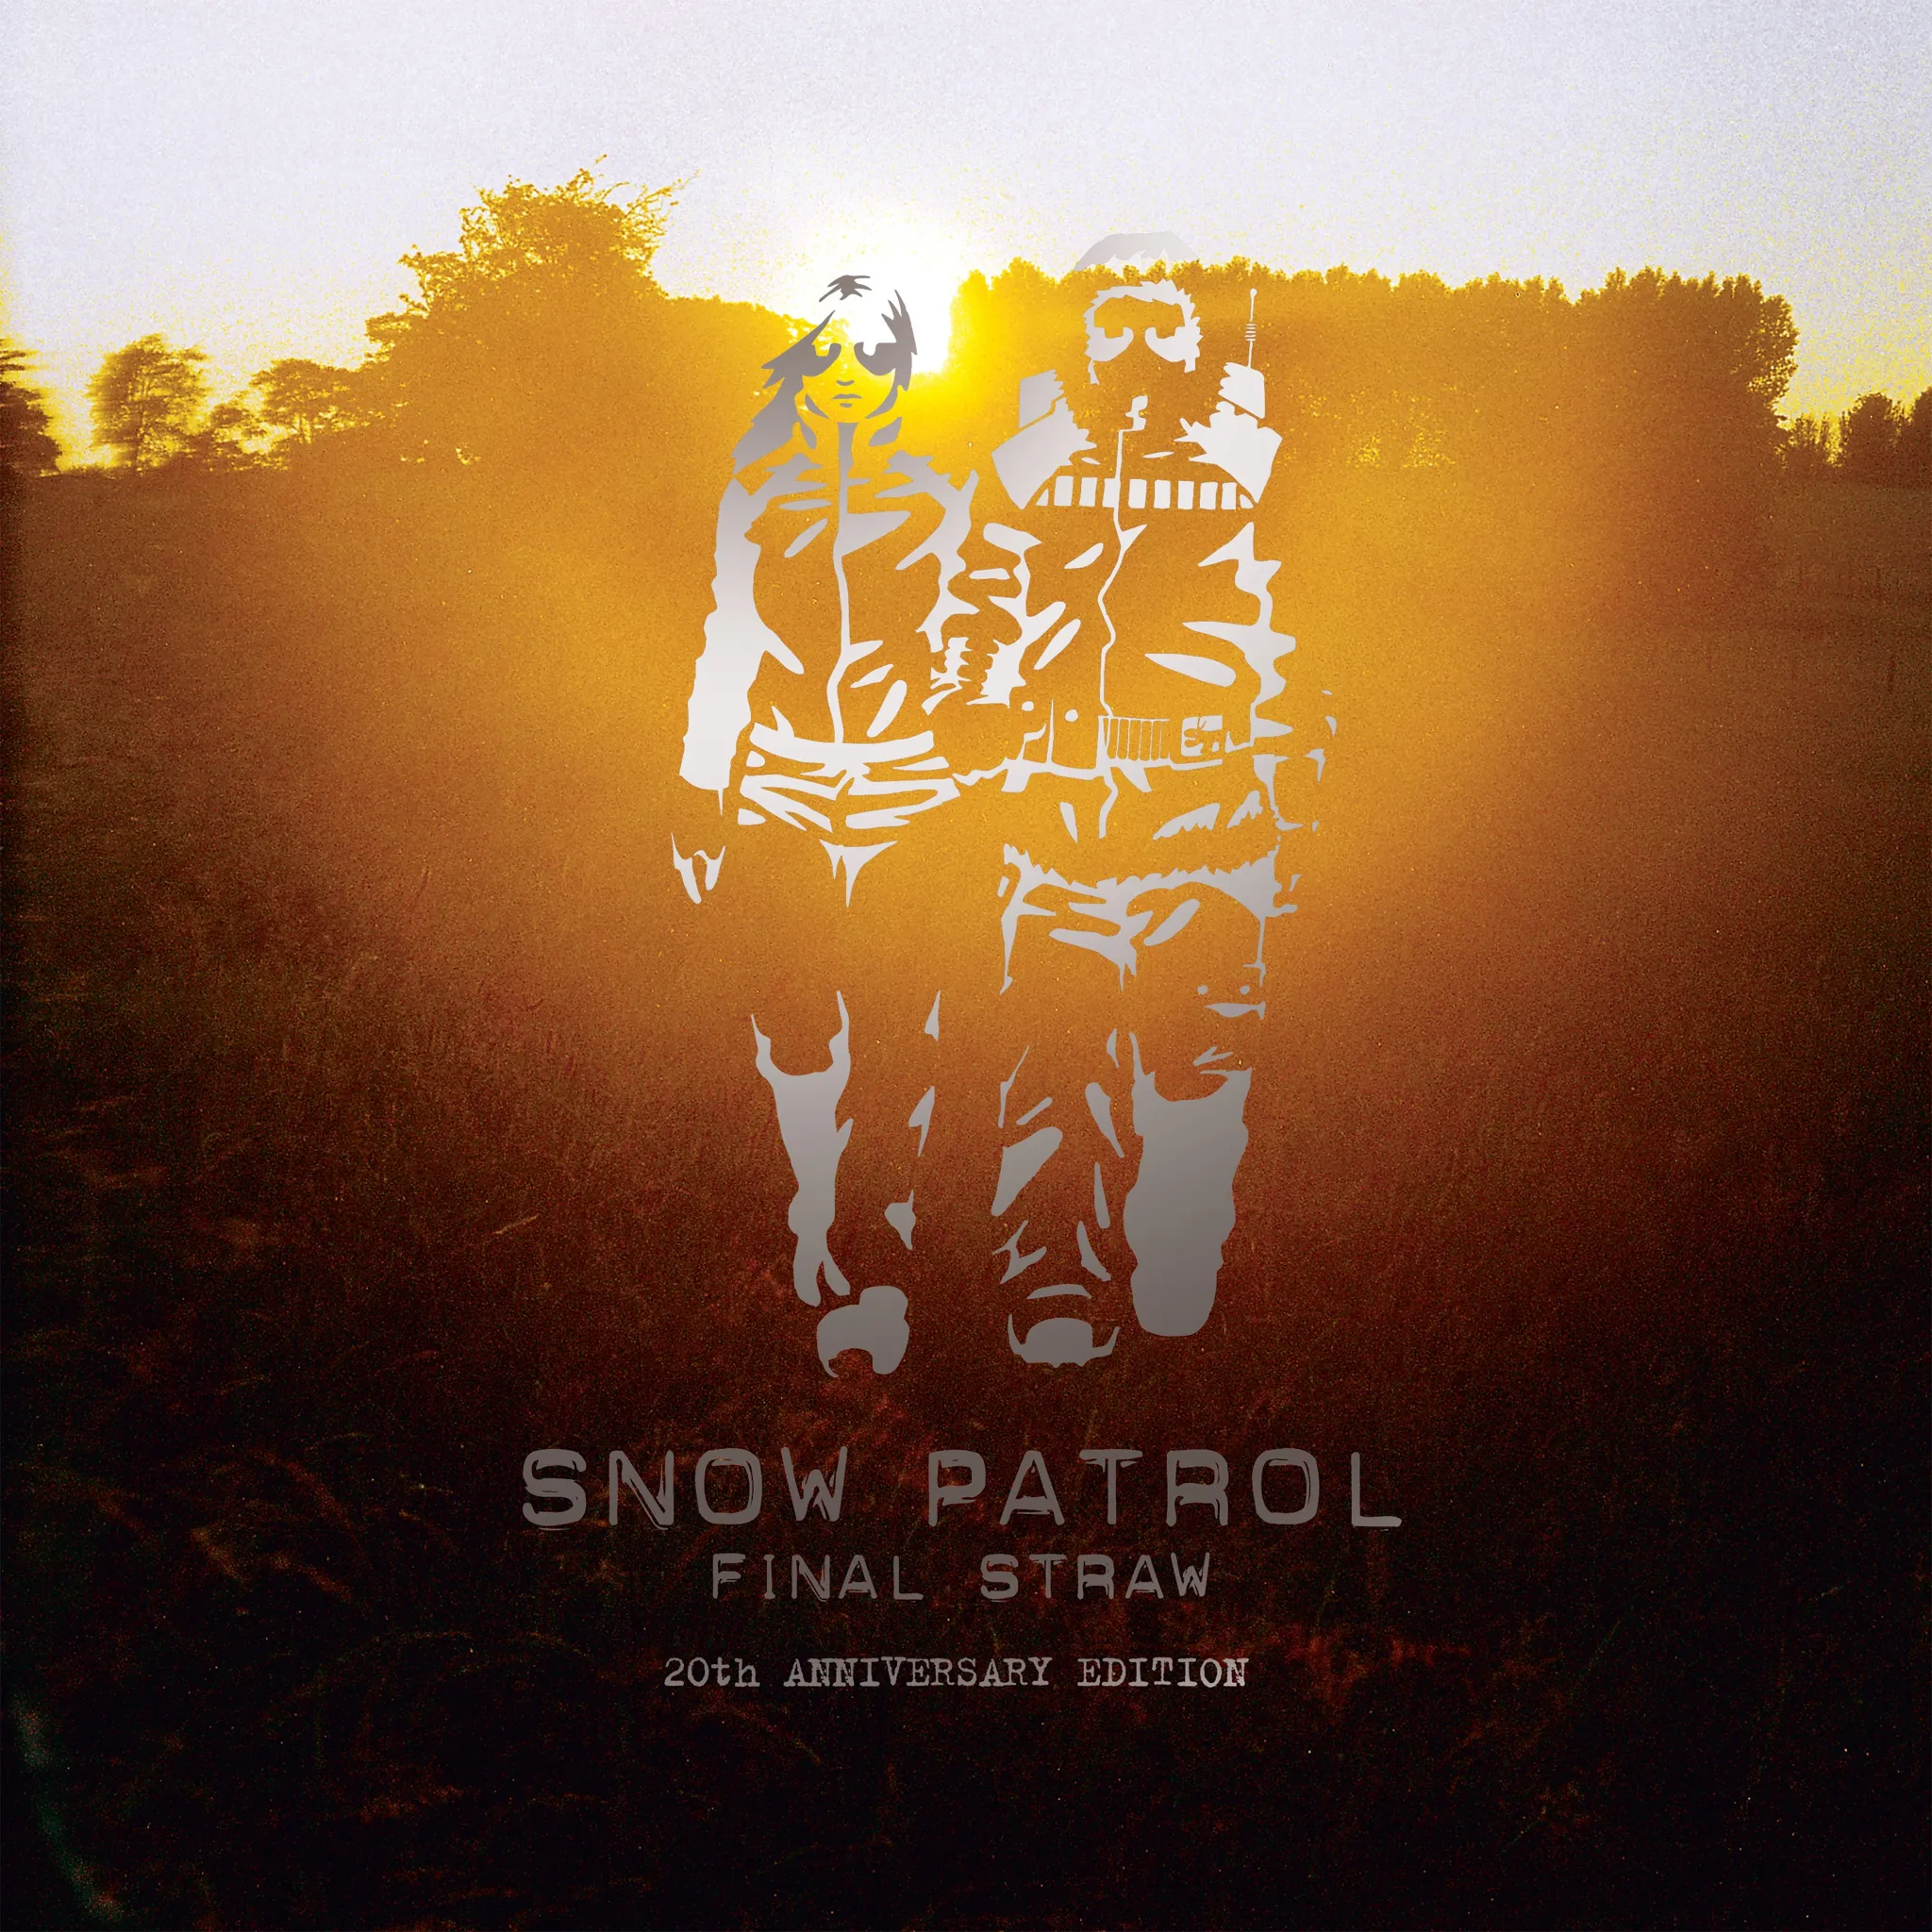 <strong>Snow Patrol - Final Straw (20th Anniversary Edition)</strong> (Vinyl LP - gold)